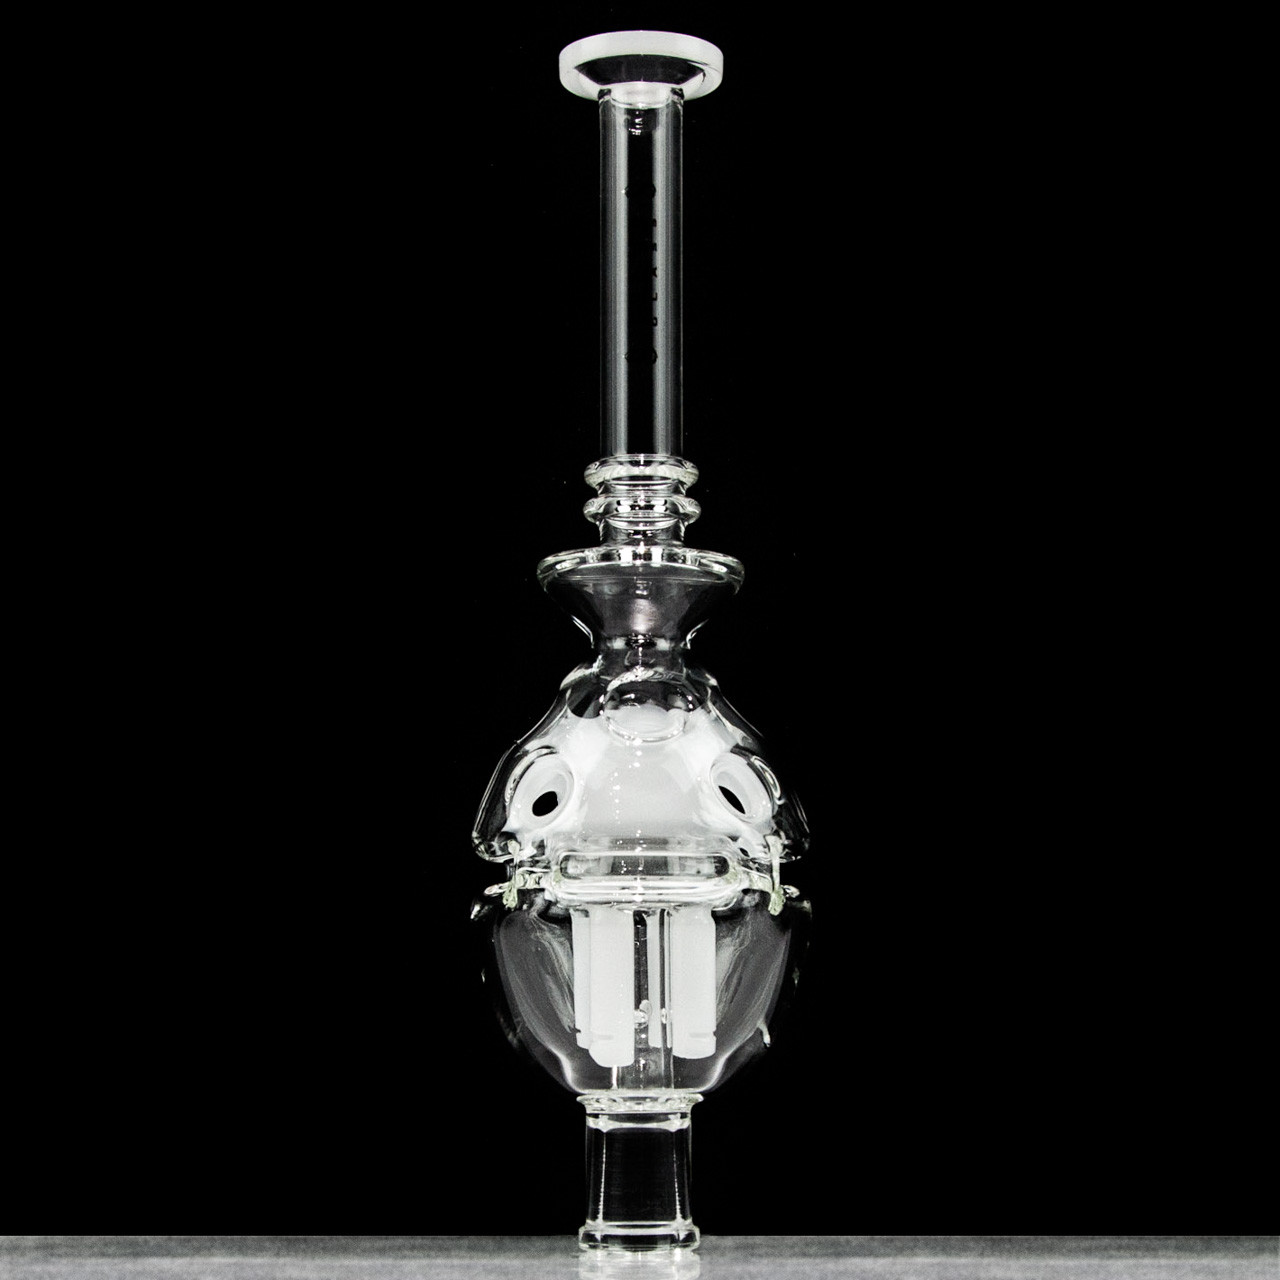 Recycler Dab Straw or Nectar Collector - Elev8